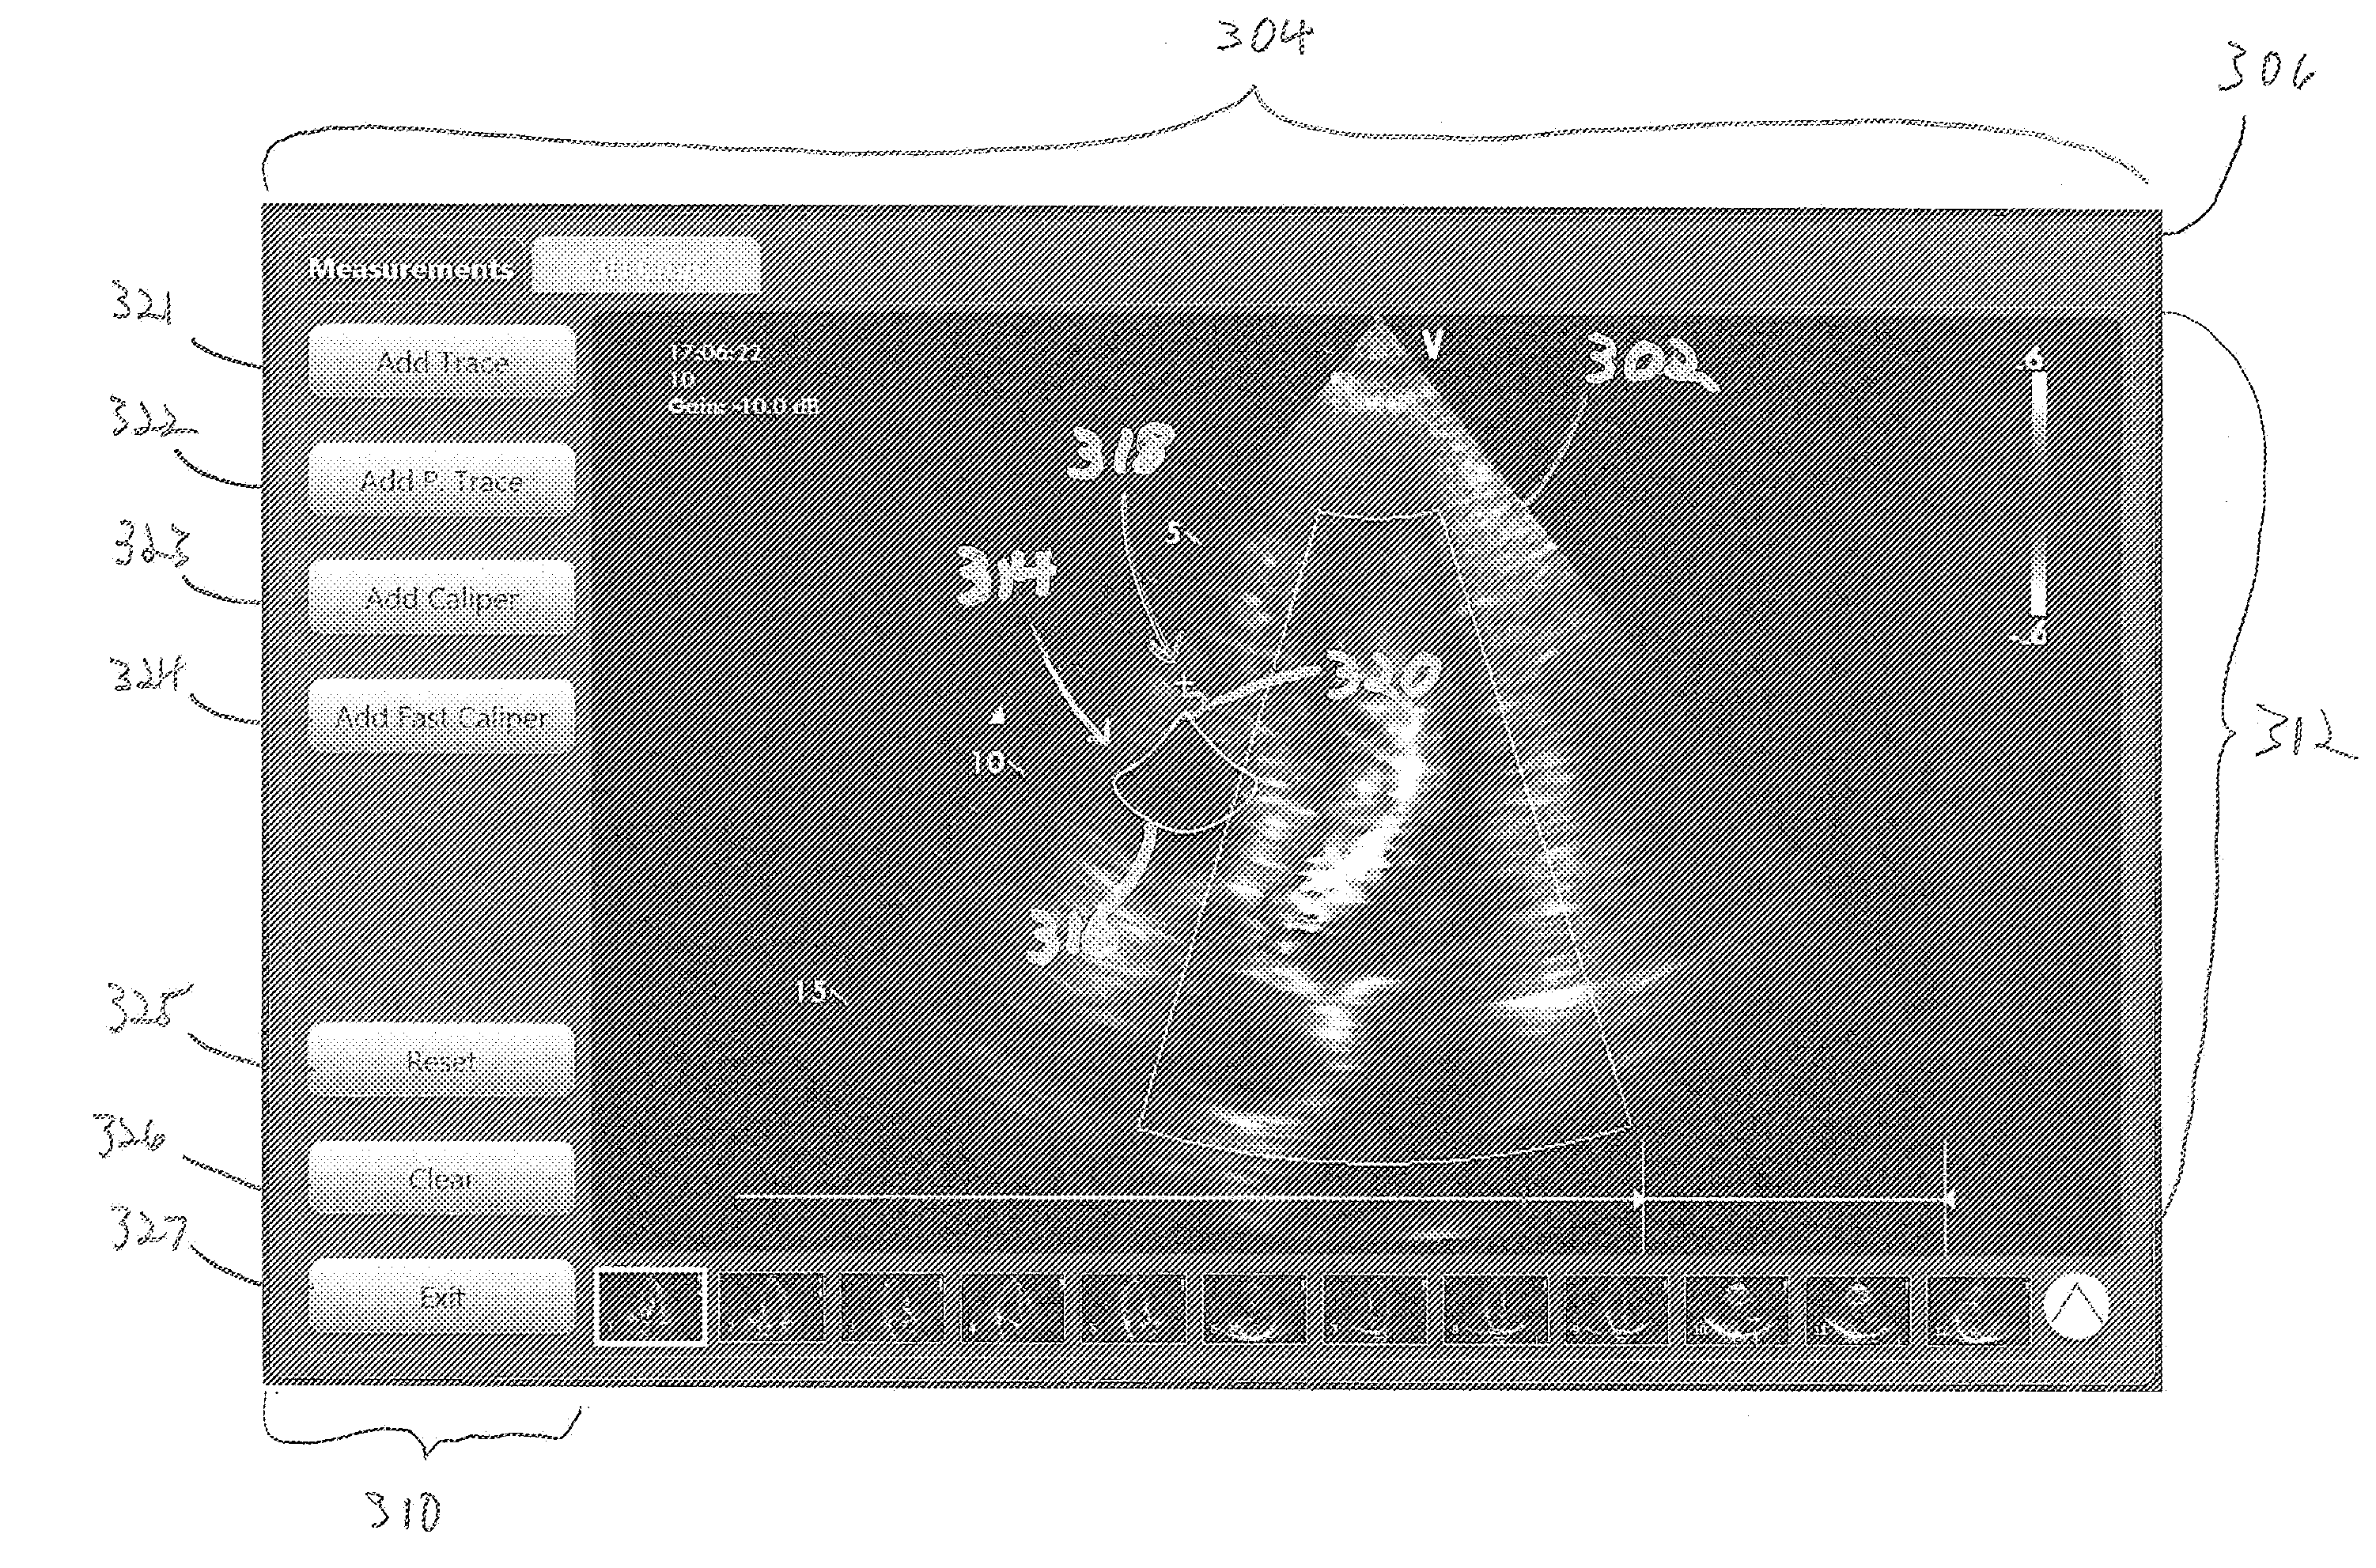 Systems and methods for using a touch-sensitive display unit to analyze a medical image